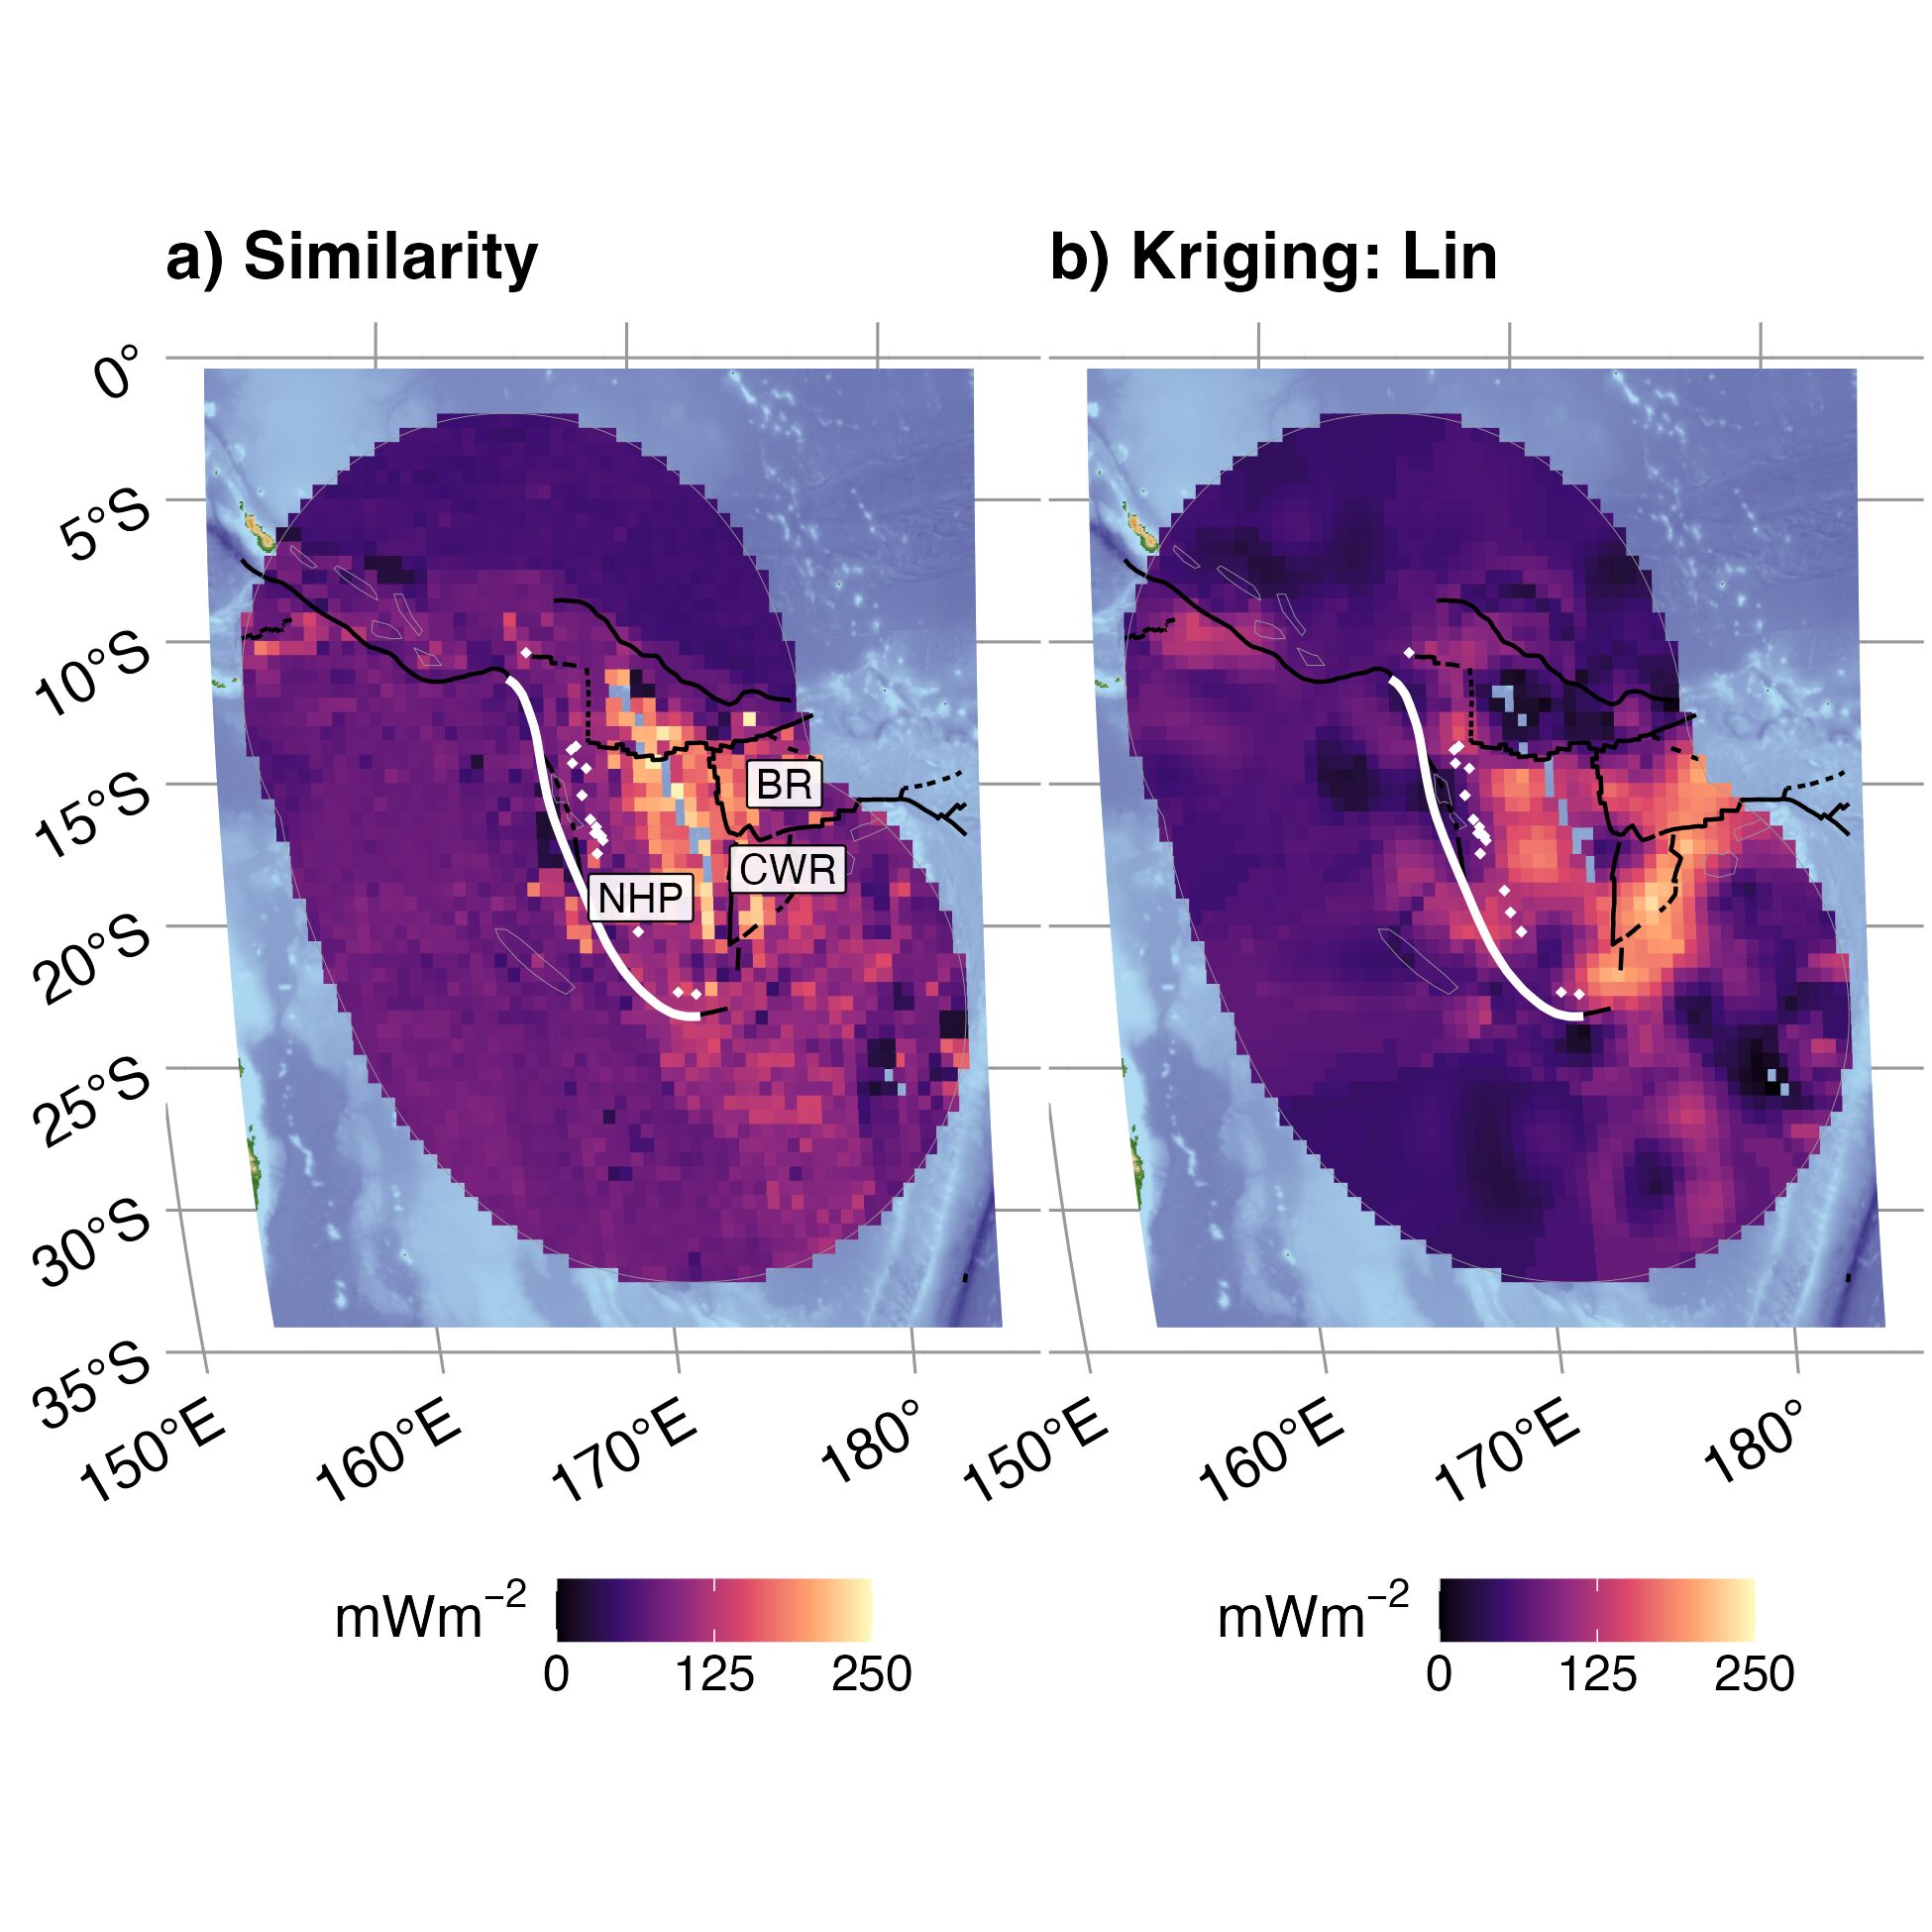 Similarity and Kriging interpolations for Vanuatu. While (a) Similarity predicts more-or-less uniformly-high surface heat flow within the region defined by many microplates, (b) excellent observational coverage allows Kriging to distinguish the most northern microplate from the New Hebrides Plate (NHP), Balmoral Reef (BR), and Conway Reef (CWR) microplates to the S. The geologic proxy datasets used to construct Similarity interpolations are apparently too coarse to resolve microplate-size features in this case. Segment boundary (bold white line) and volcanoes (gold diamonds) defined by Syracuse & Abers (2006). Similarity interpolation from Lucazeau (2019). Plate boundaries (bold black lines) defined by Lawver et al. (2018).